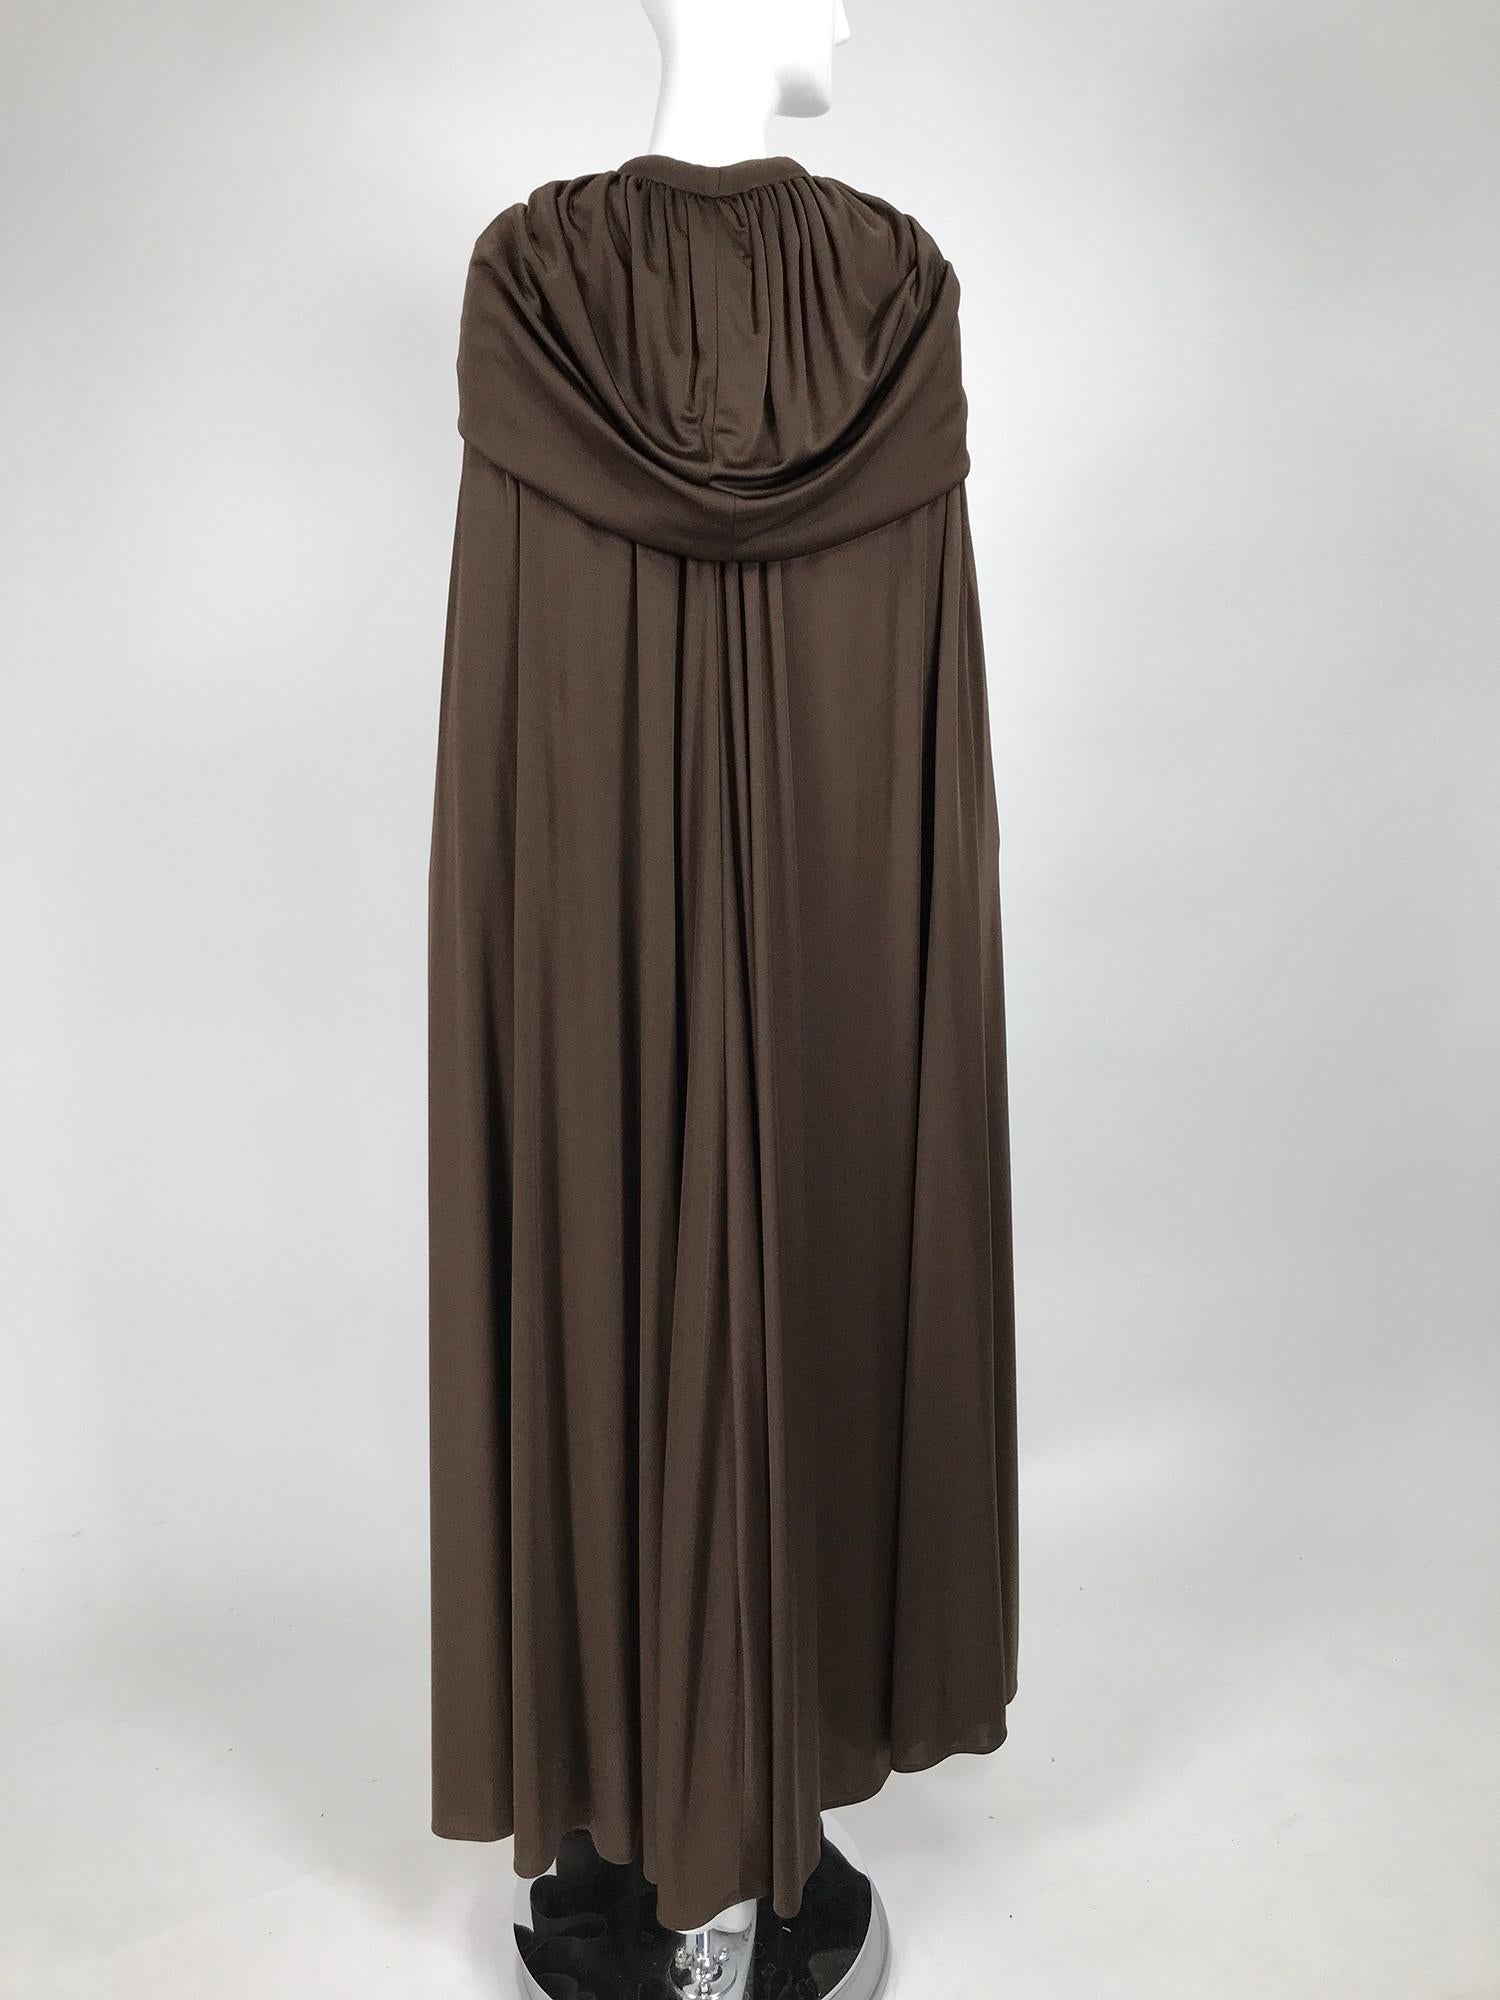 Loris Azzaro Couture Chocolate Brown Silky Jersey Full Length Hooded Cape 1970s In Good Condition For Sale In West Palm Beach, FL